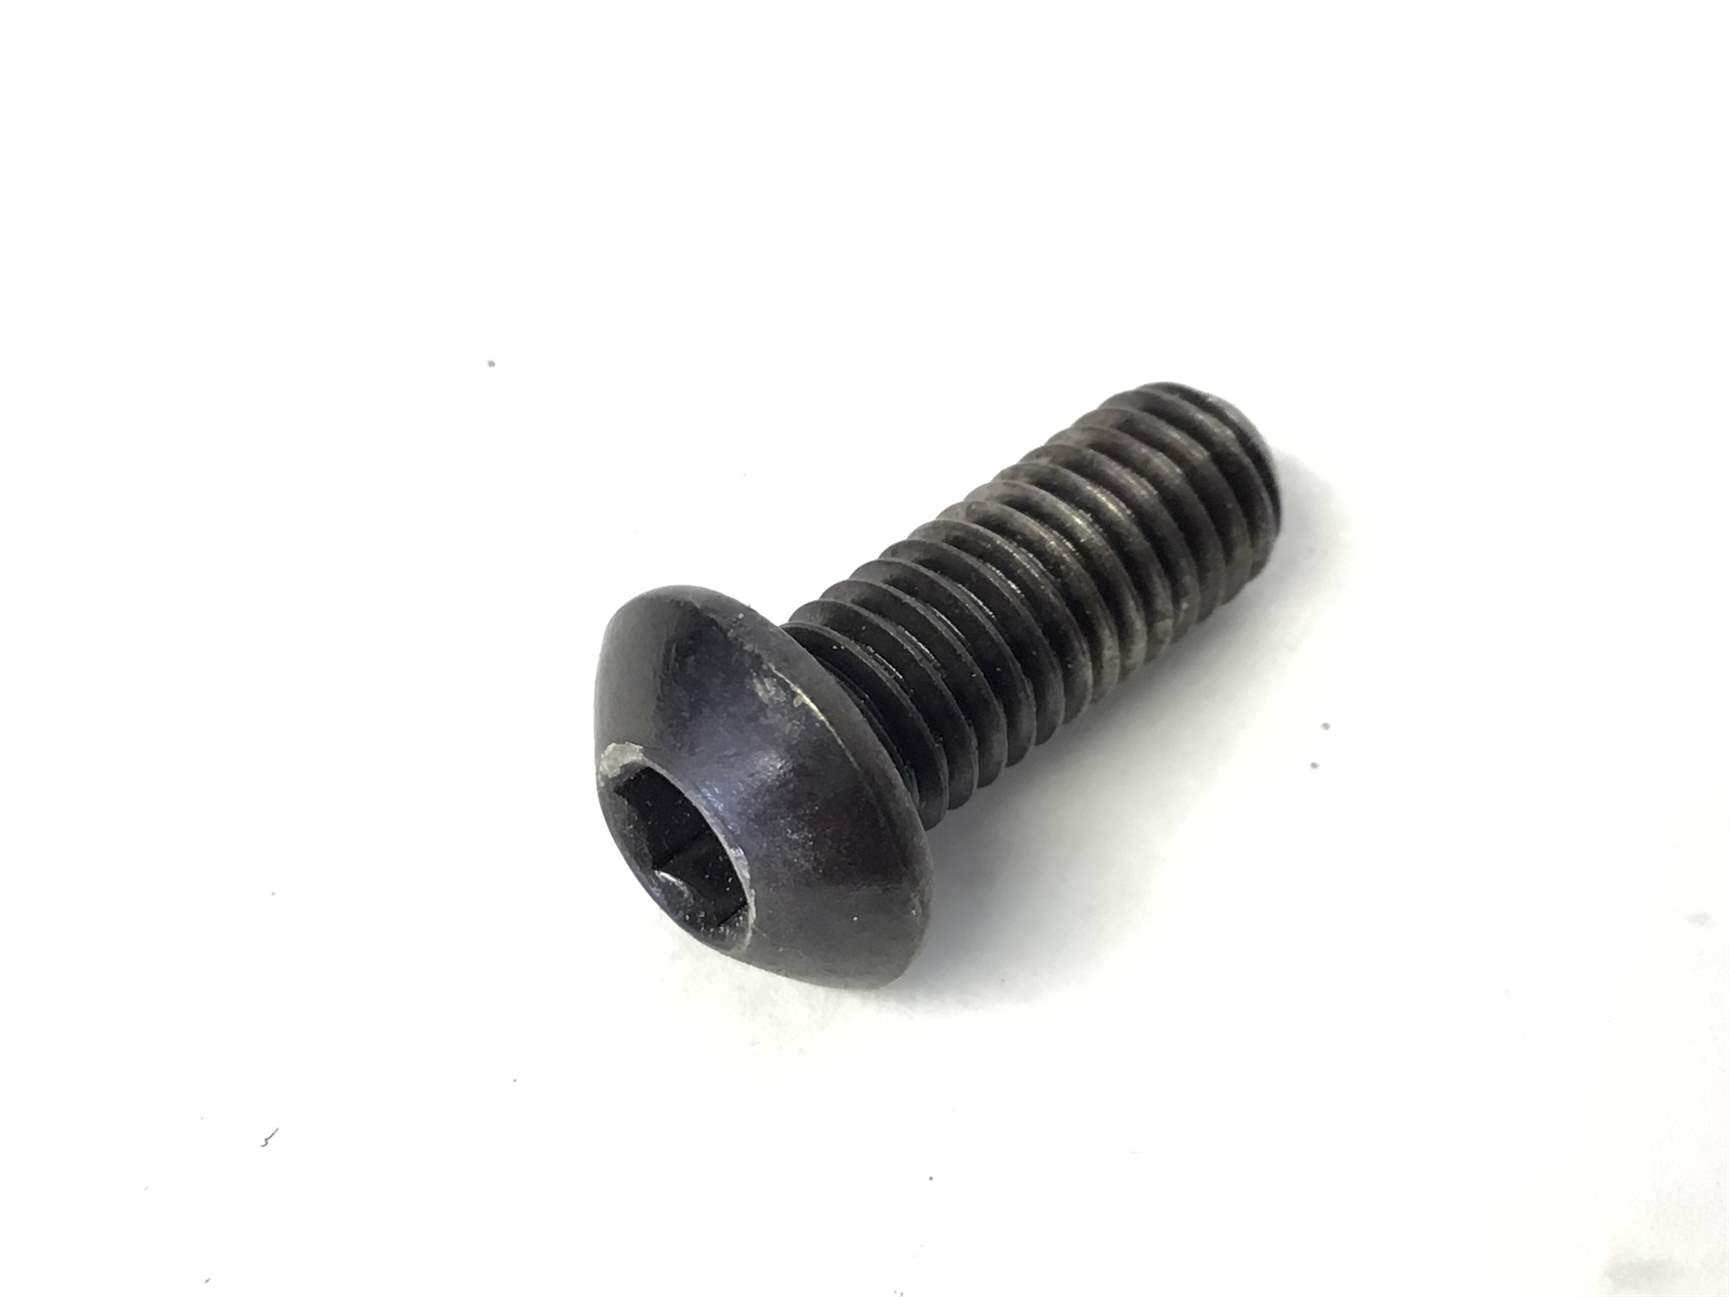 Button Head Screw M8 1.25x20mm (Used)